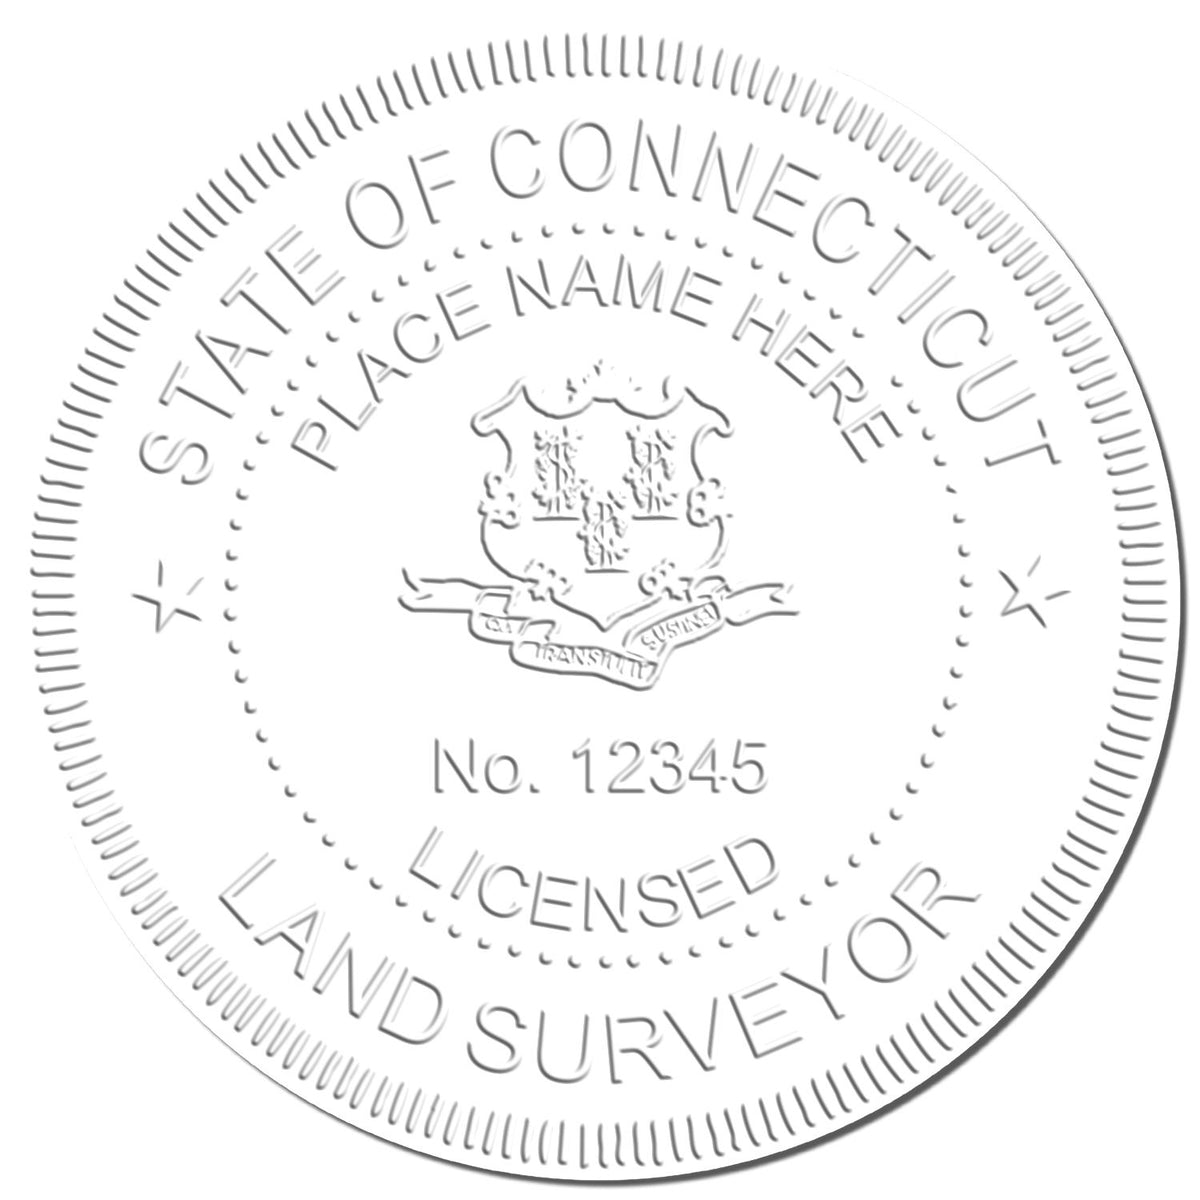 This paper is stamped with a sample imprint of the Heavy Duty Cast Iron Connecticut Land Surveyor Seal Embosser, signifying its quality and reliability.